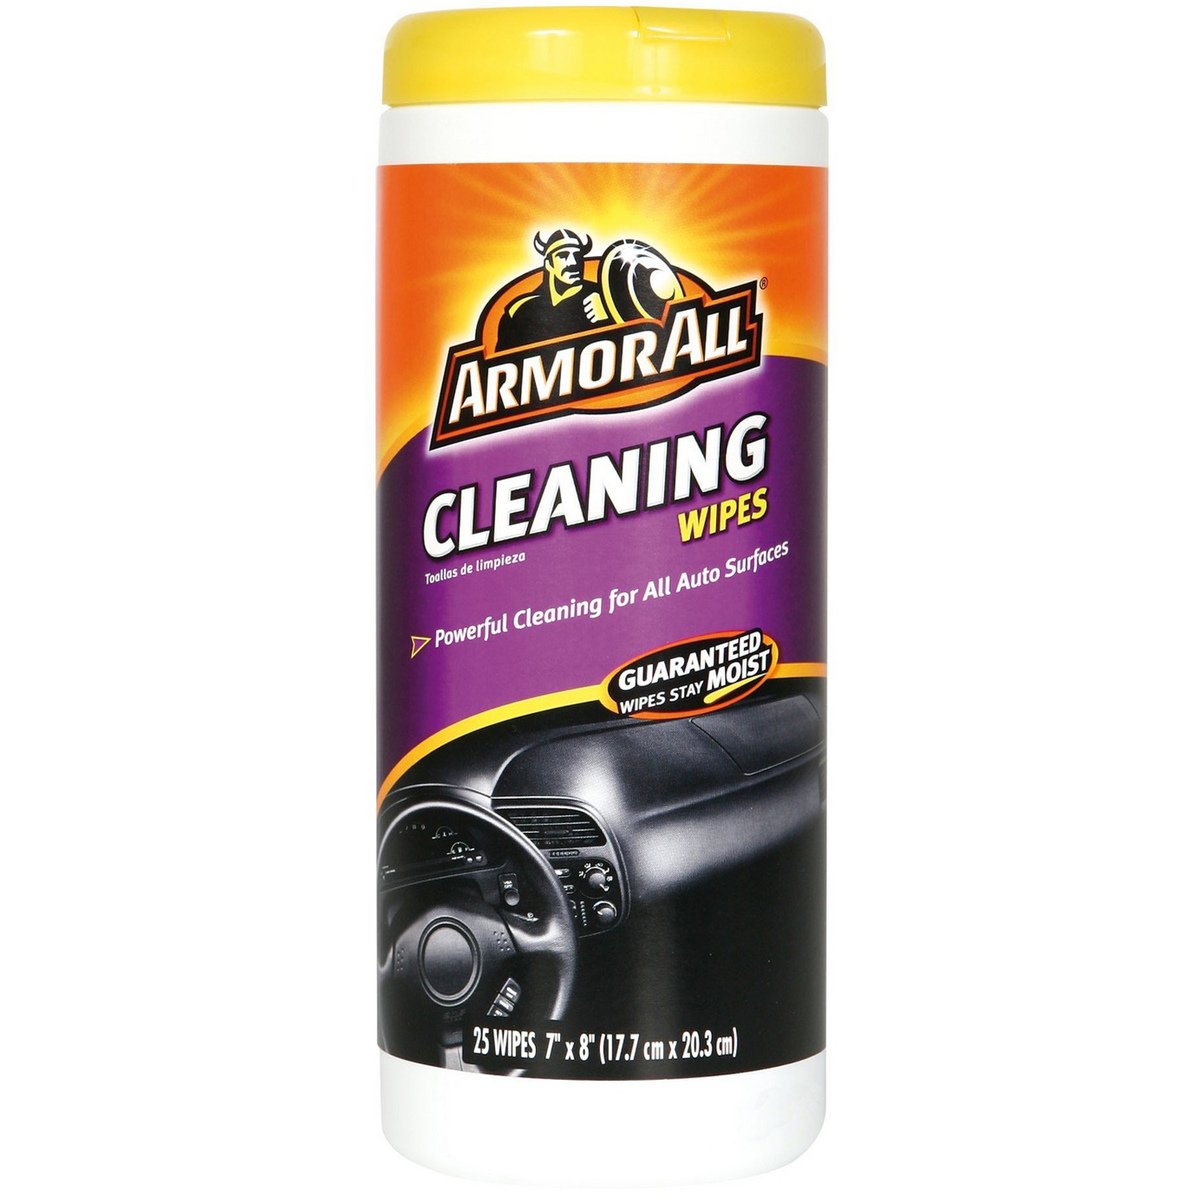 Armor All Cleaning Wipes 25pcs Online